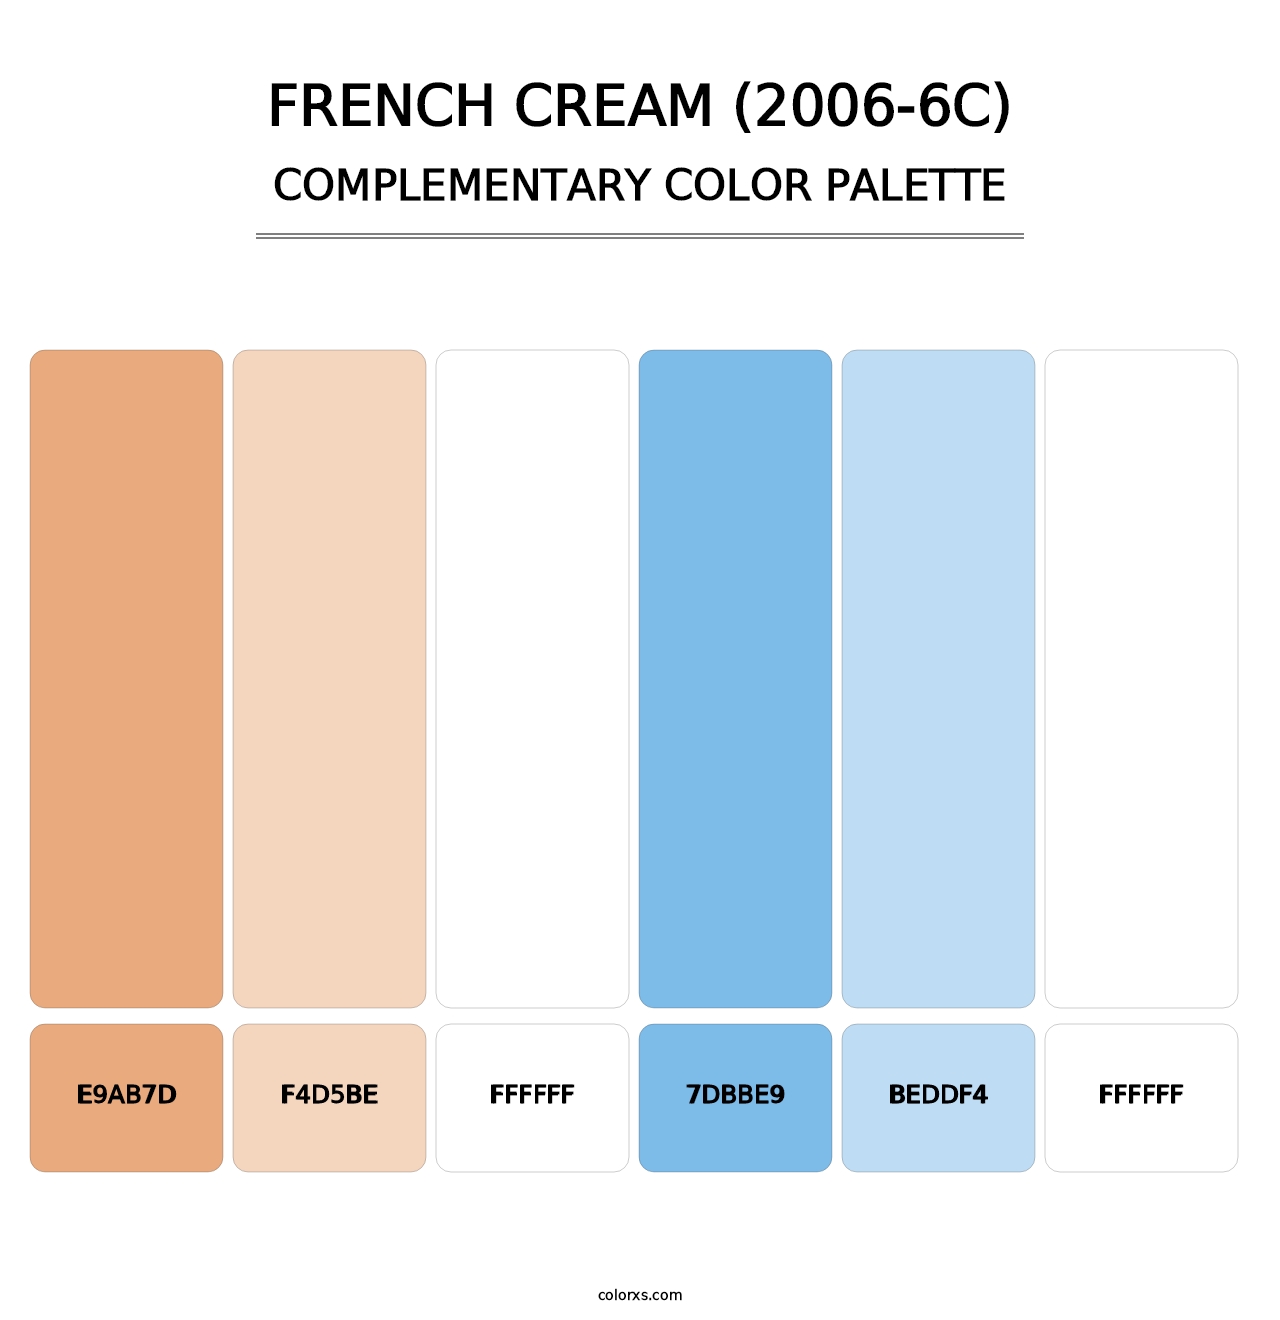 French Cream (2006-6C) - Complementary Color Palette